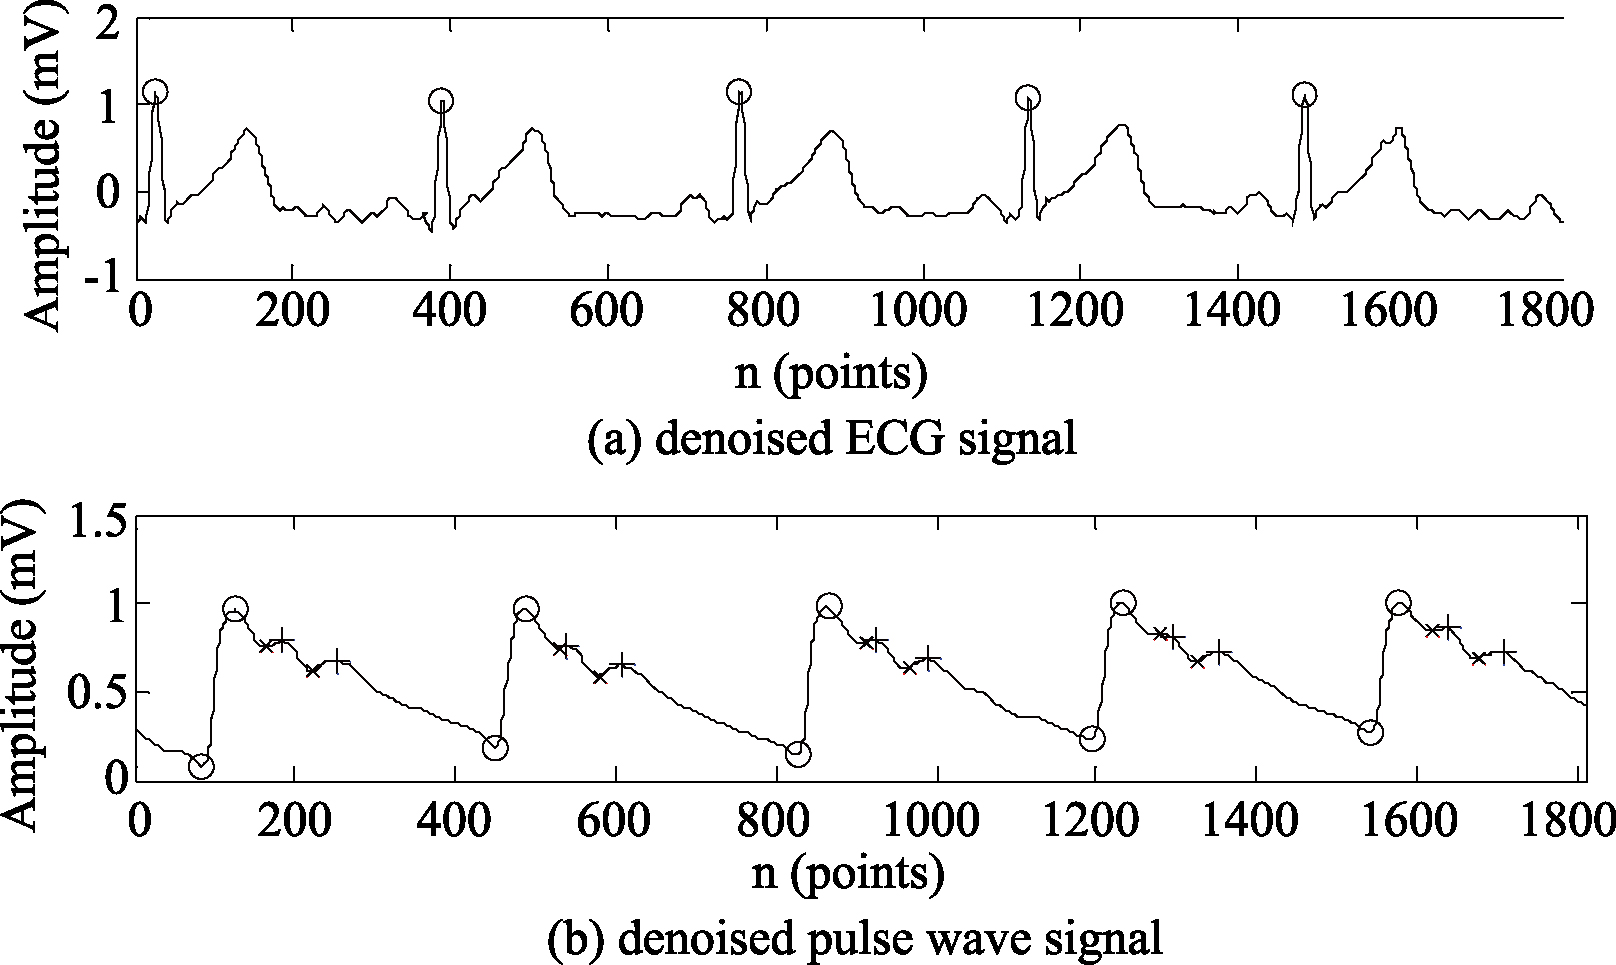 Feature point recognition of the denoised ECG and pulse wave signals.